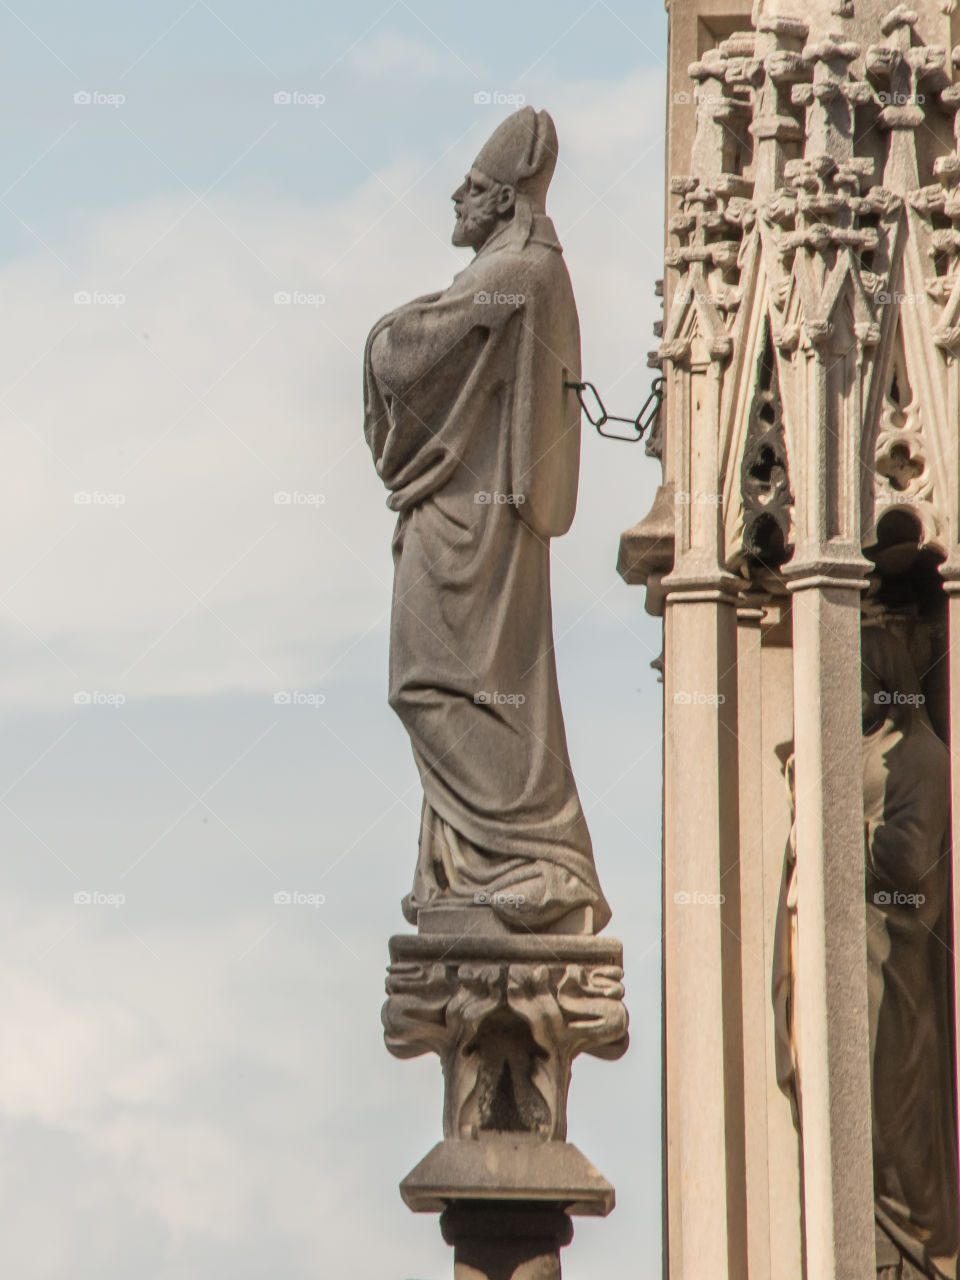 A special art of Milan Cathedral (Italy)